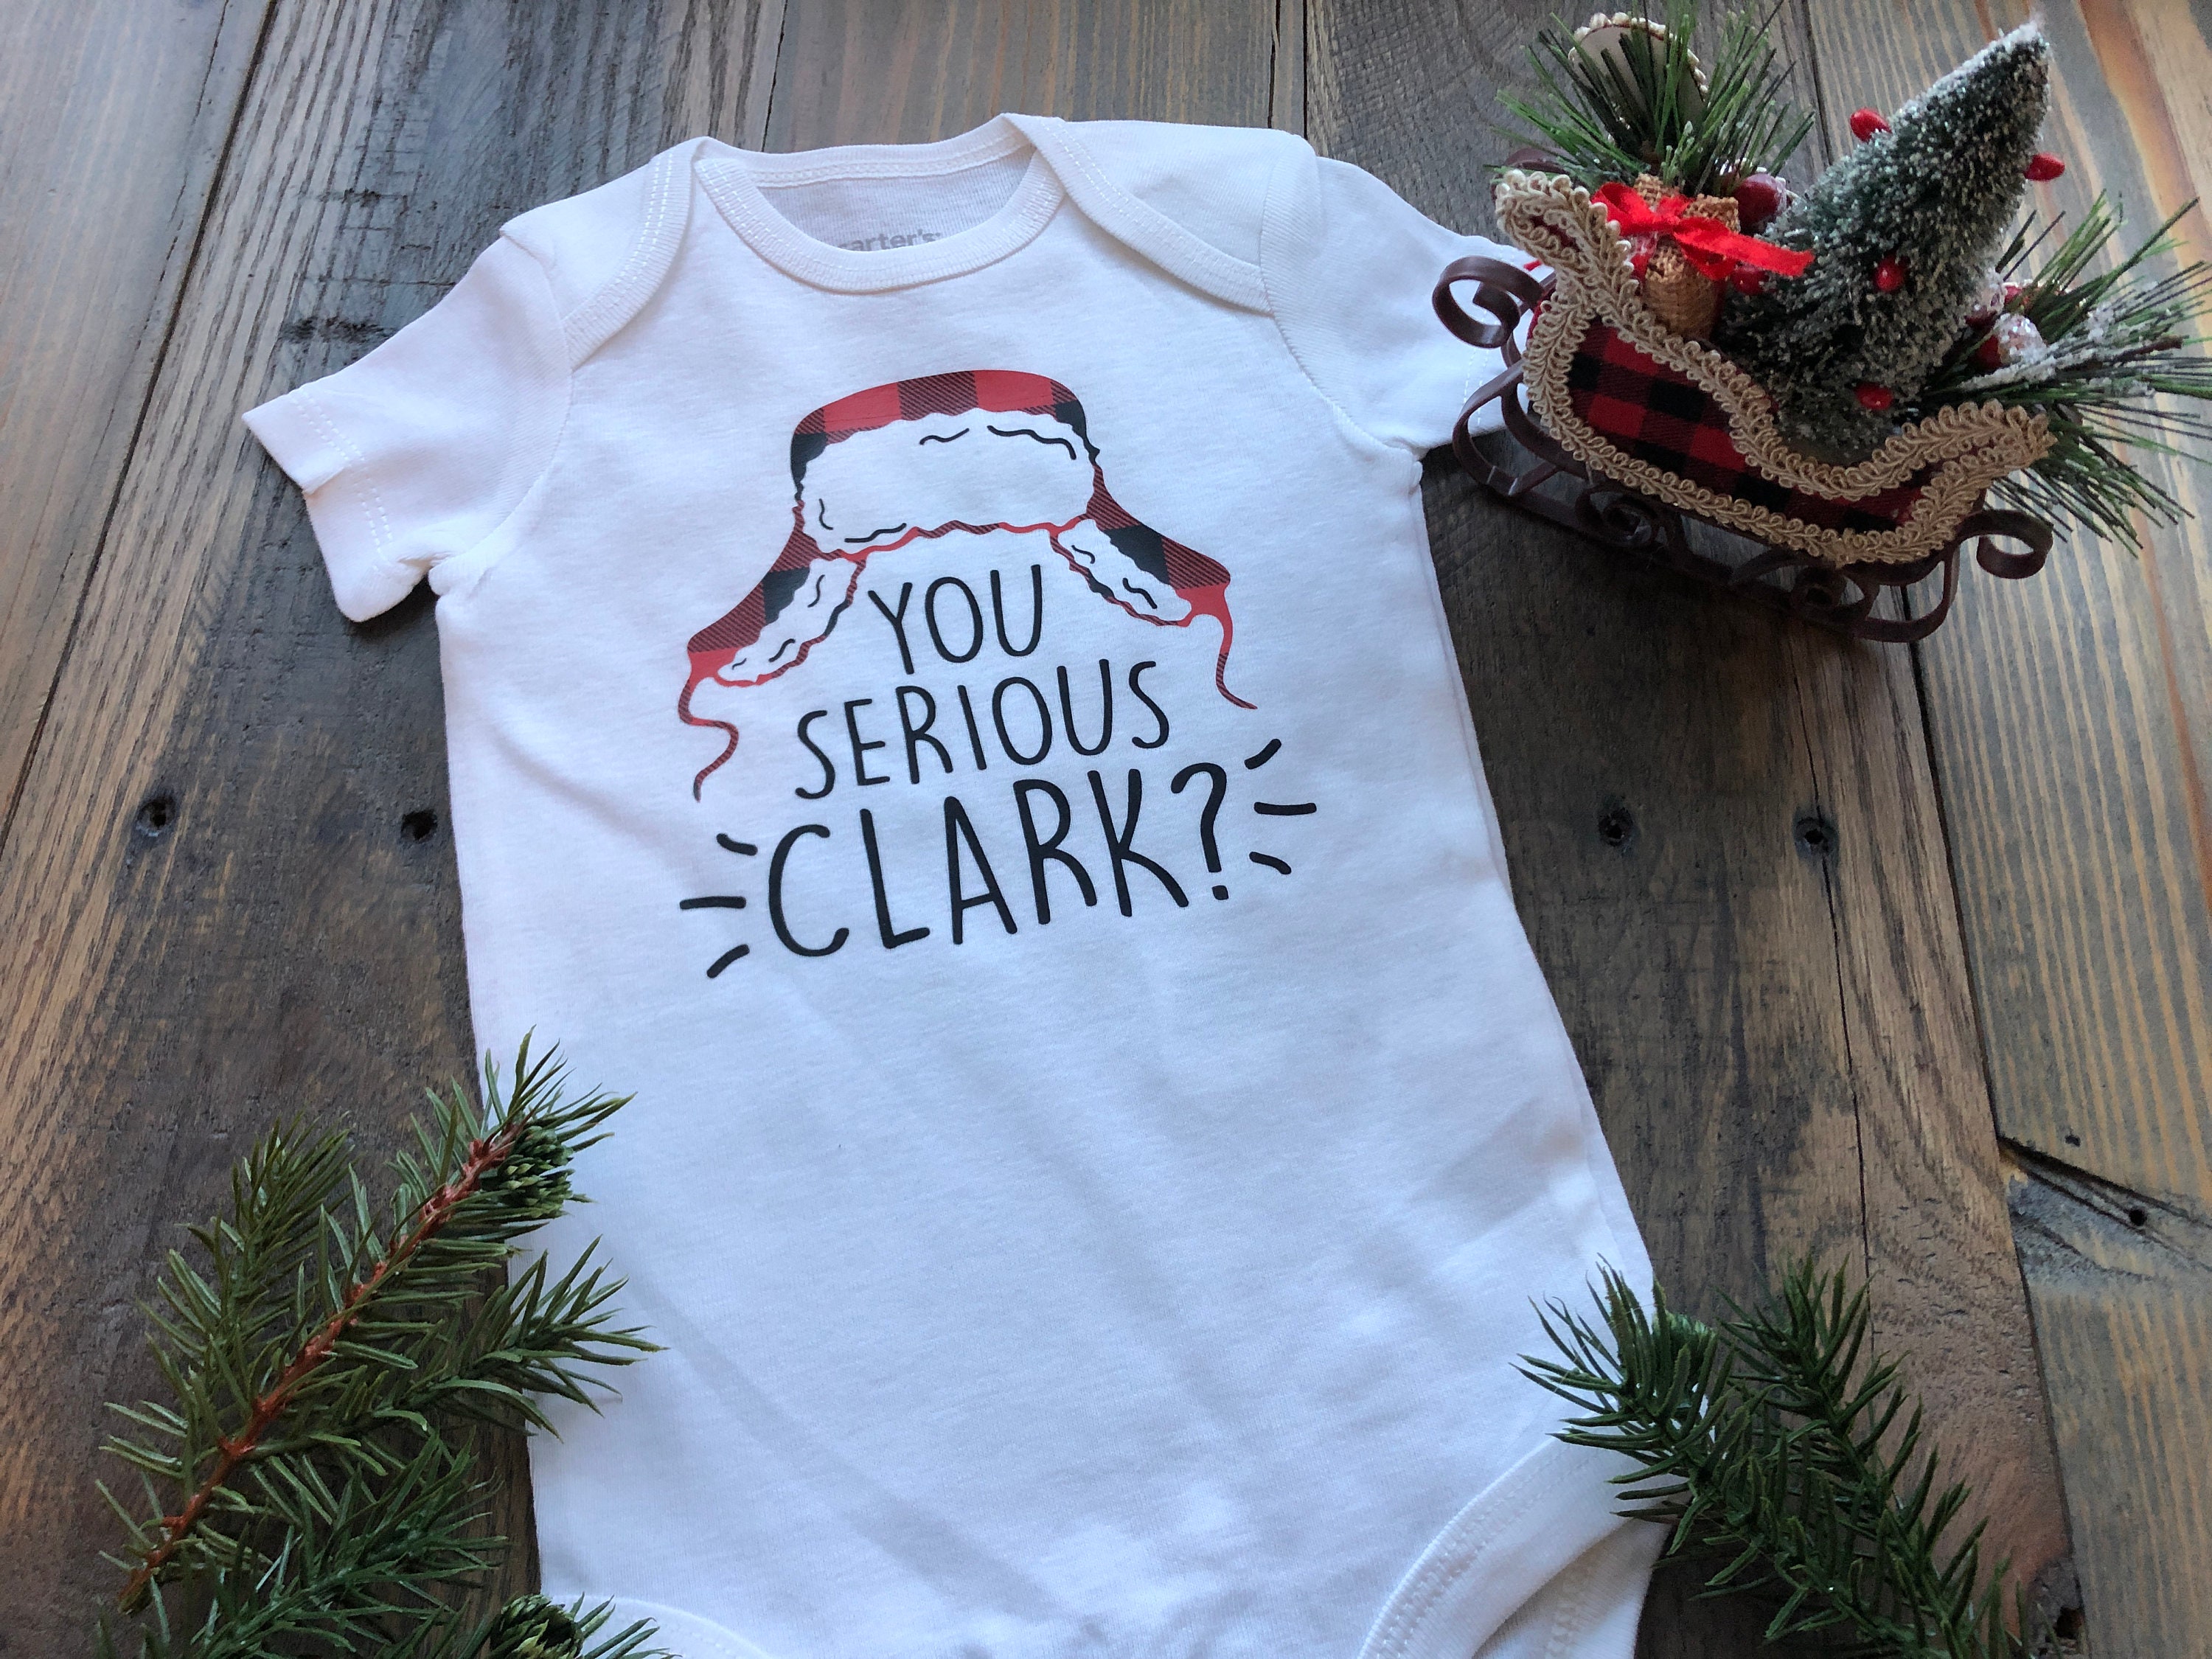 Clark Family Gatherin New You Serious Unisex Baby Long Sleeve Baby Body Suit and Toddler T-shirts for Thanksgiving and Christmas party